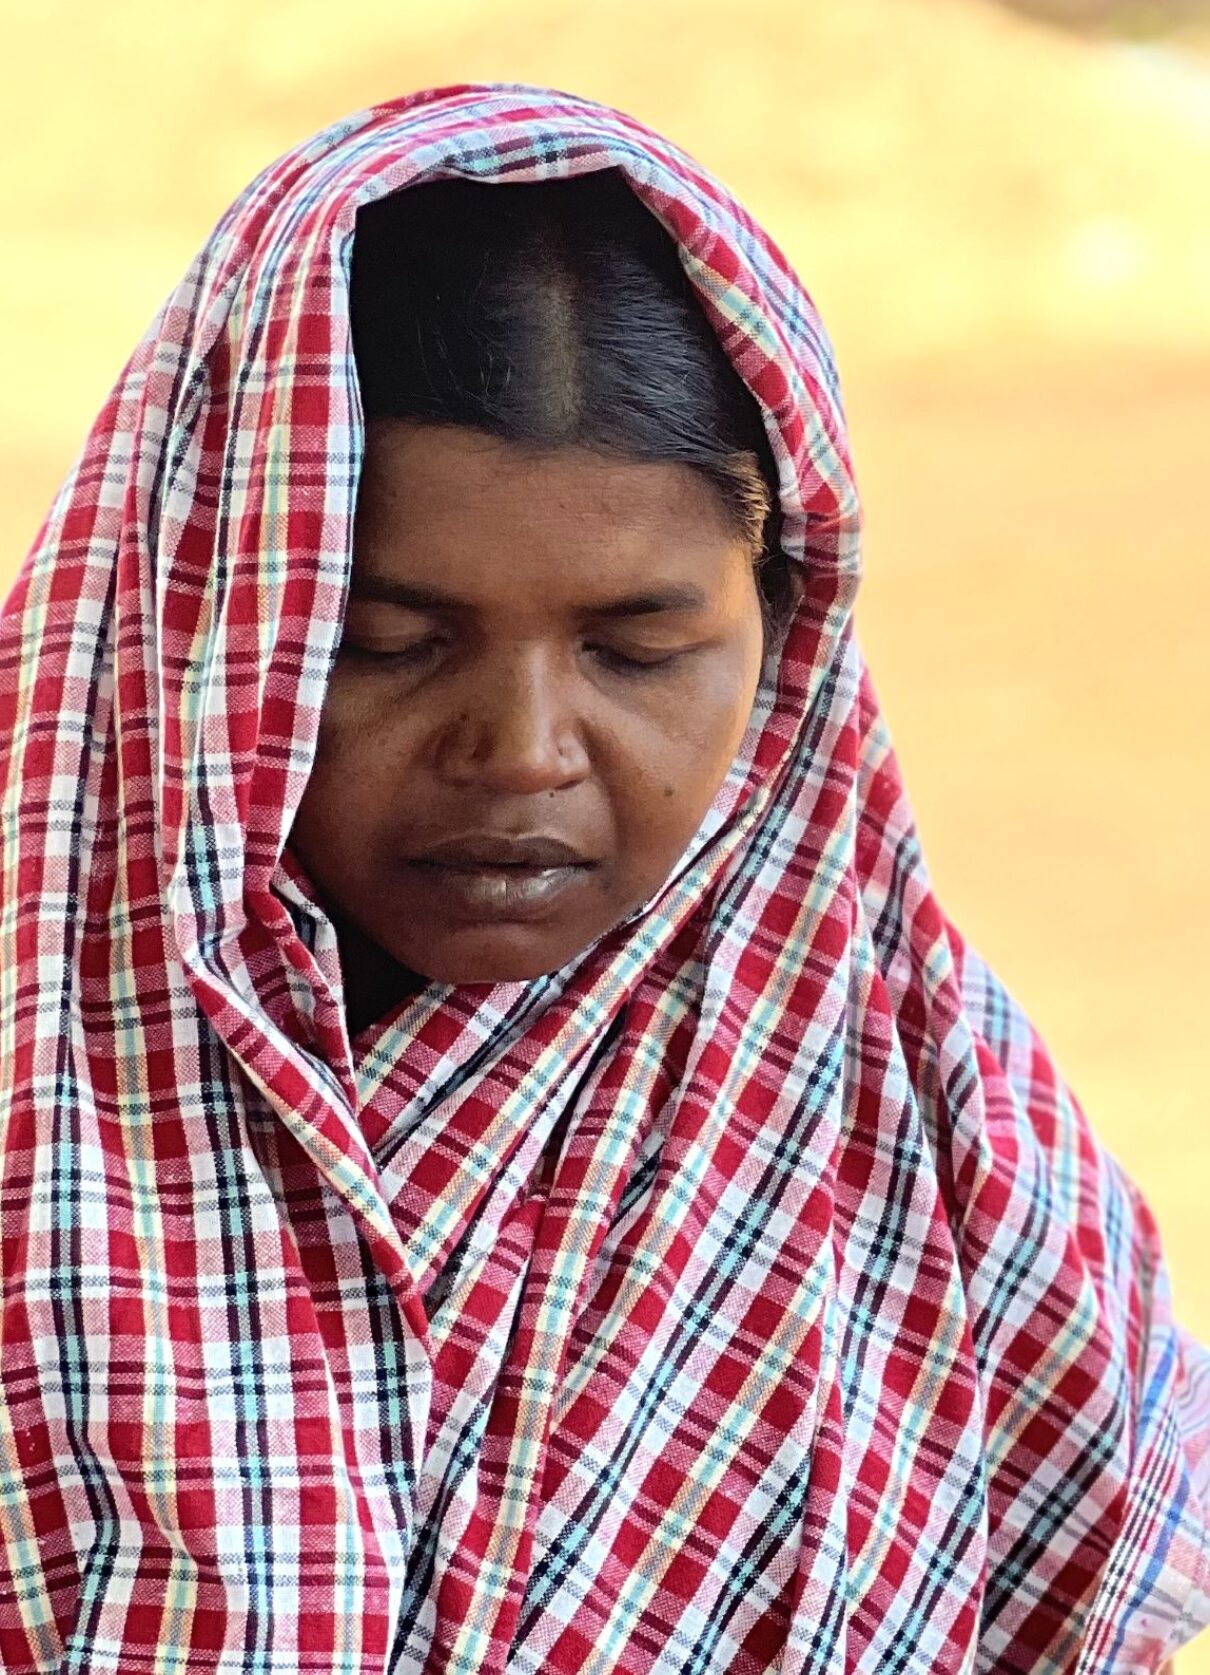 "Widow of Christian Killed for His Faith in India Flees Village"